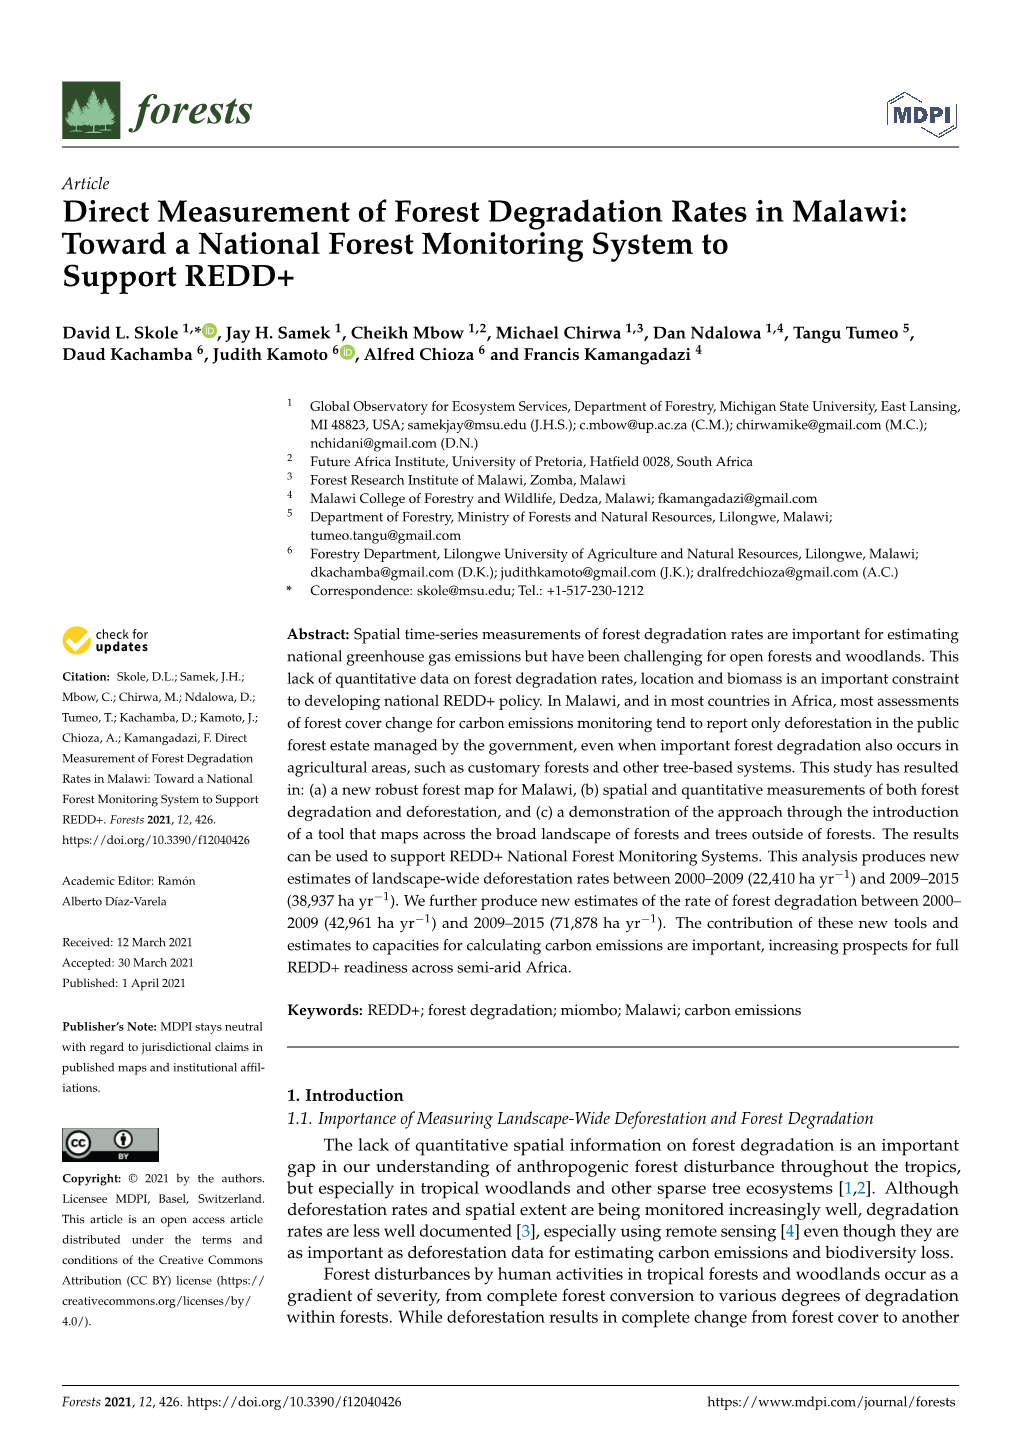 Direct Measurement of Forest Degradation Rates in Malawi: Toward a National Forest Monitoring System to Support REDD+